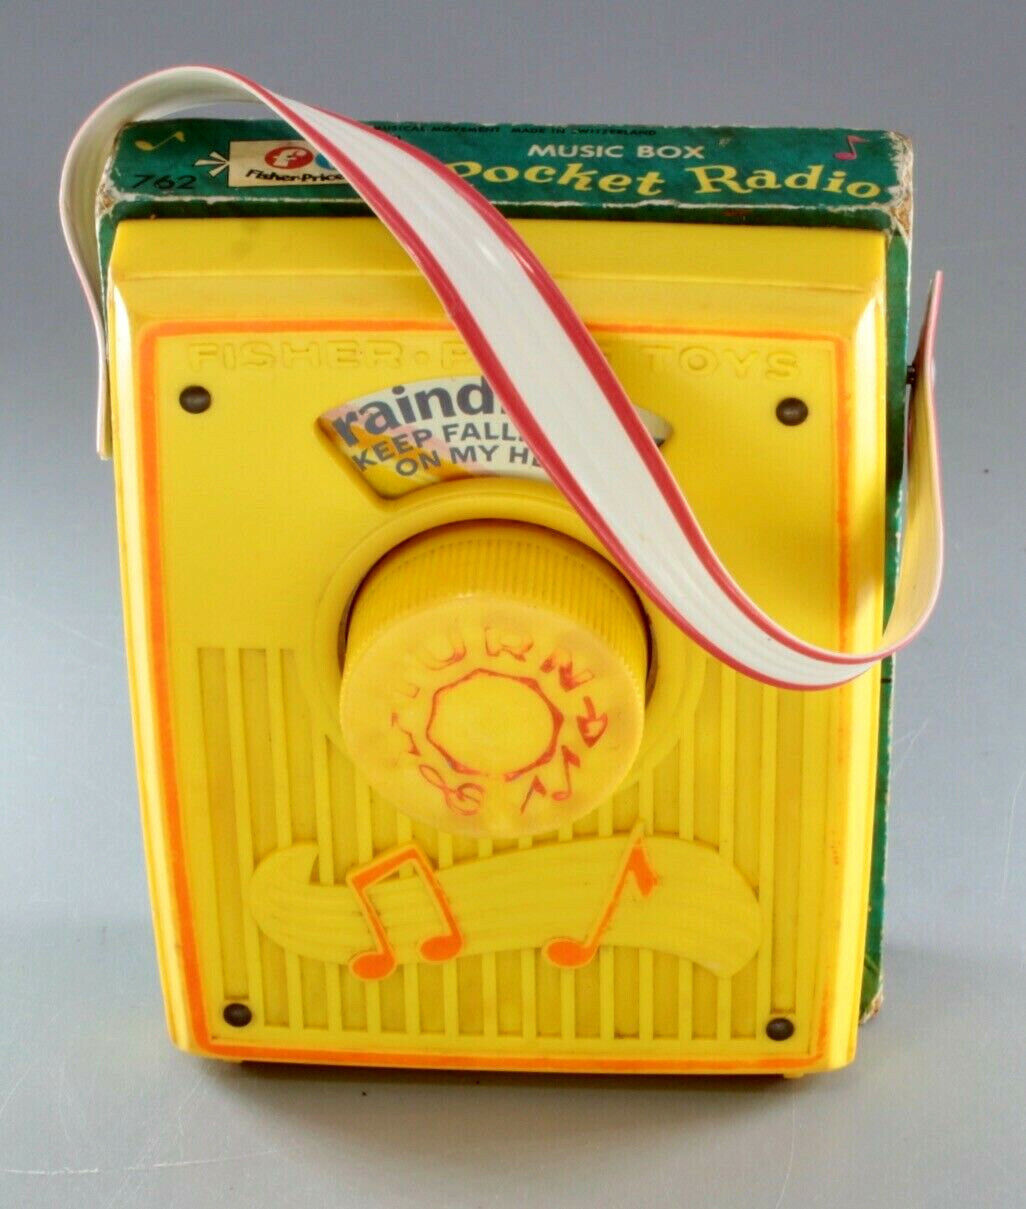 VTG 1972 Fisher Price Music Box Pocket Raindrops New products world's Cheap mail order specialty store highest quality popular Fall Radio Keep